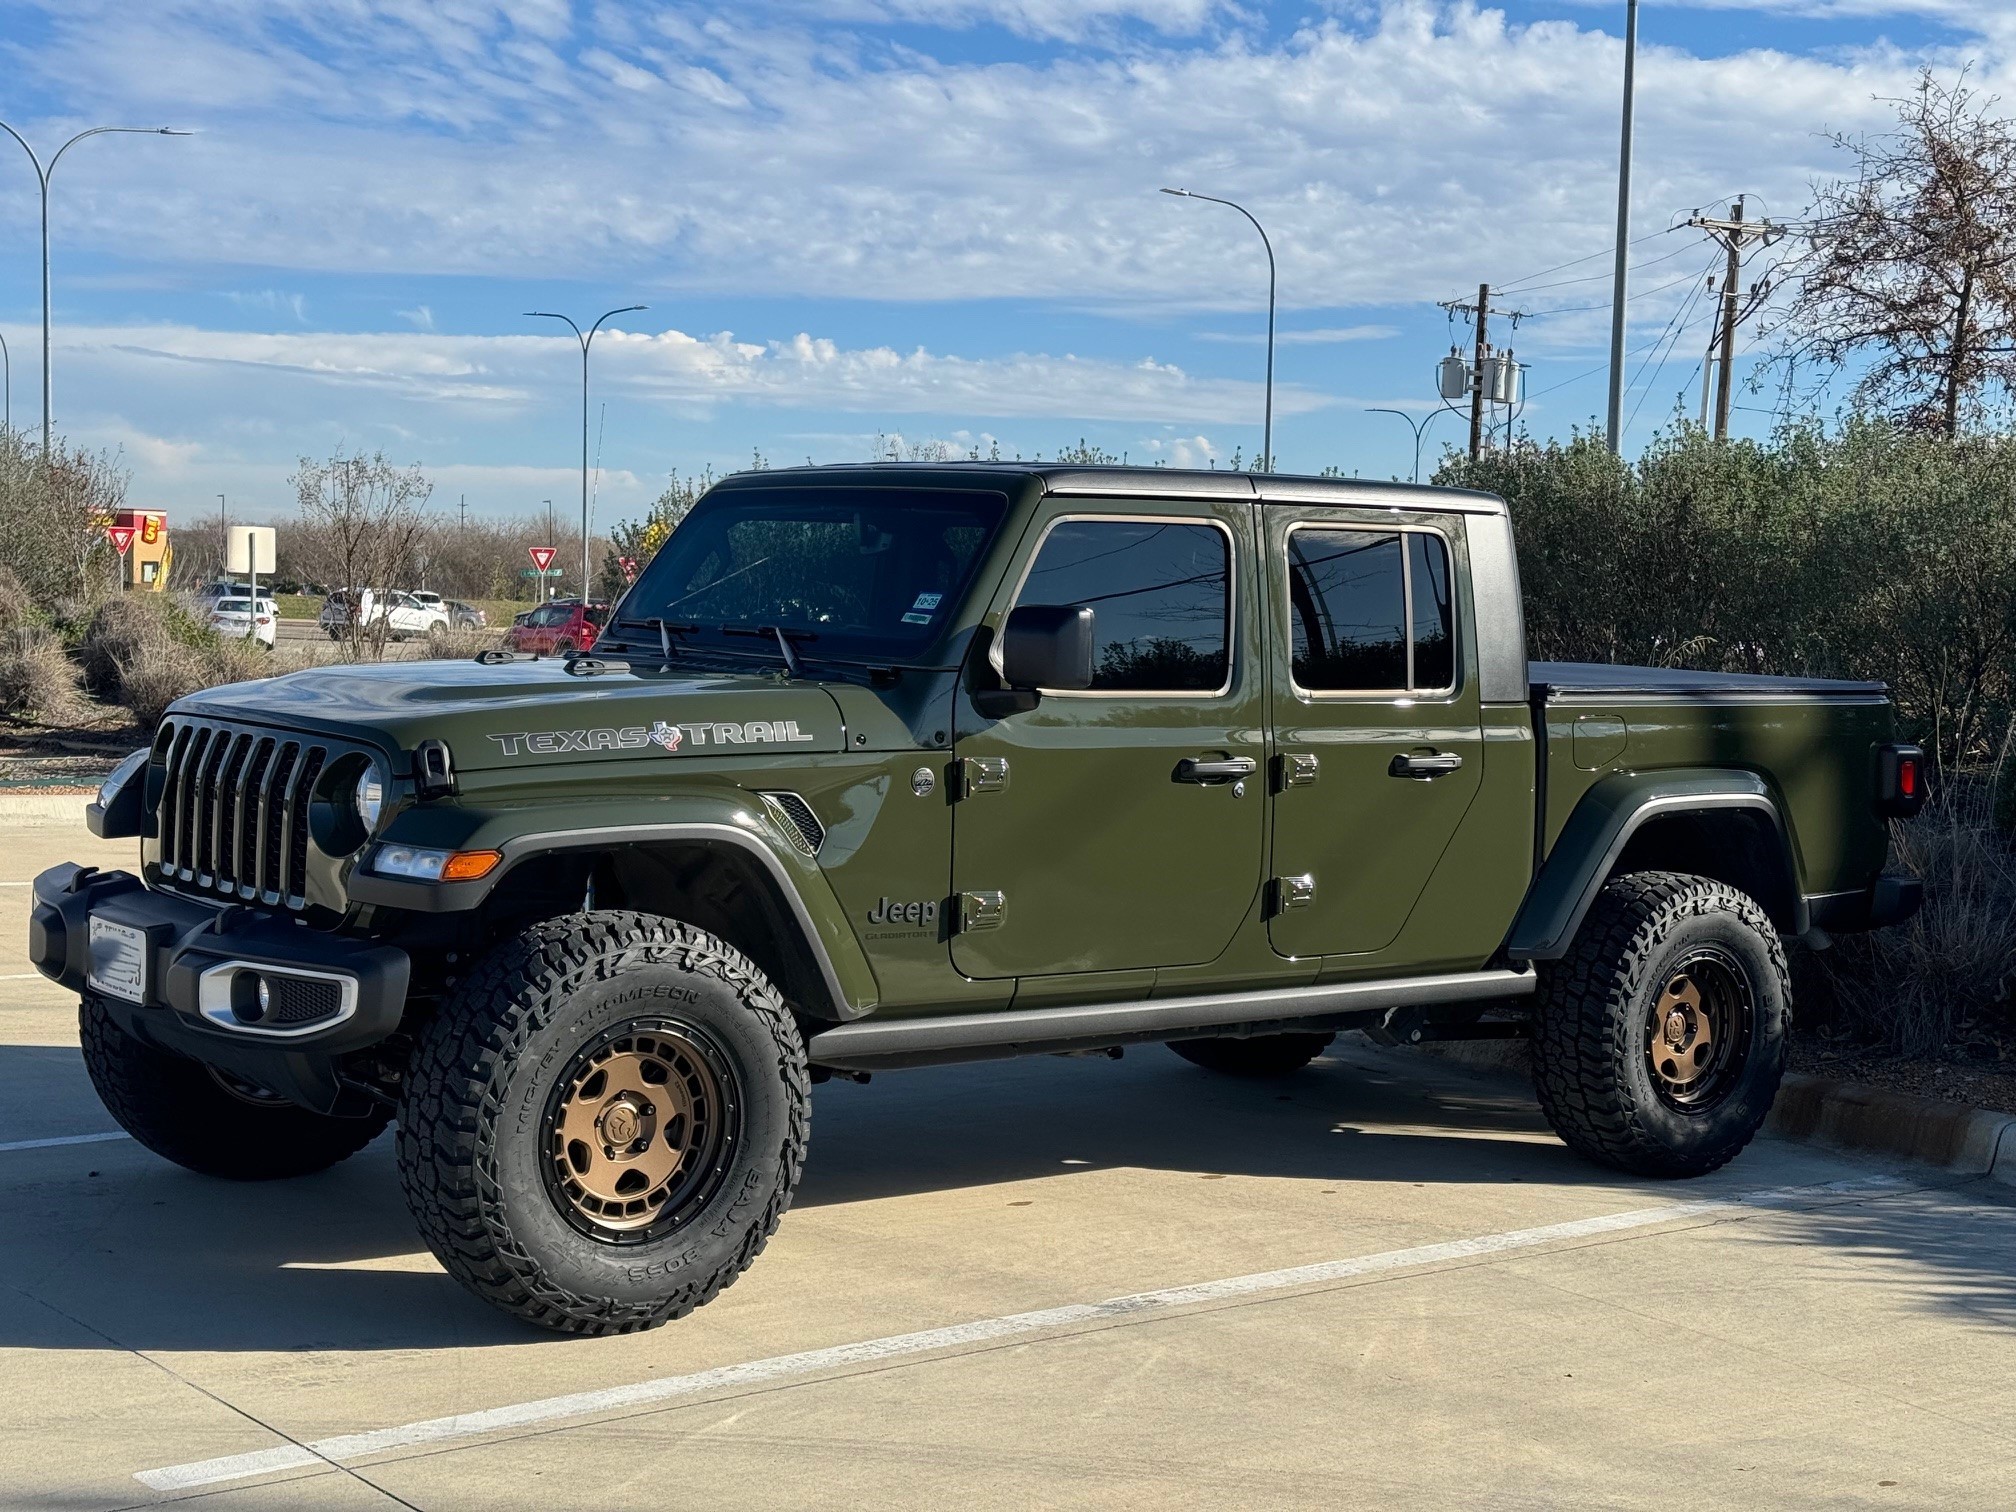 Jeep Gladiator Lets see those 17" RIMS ! After 1